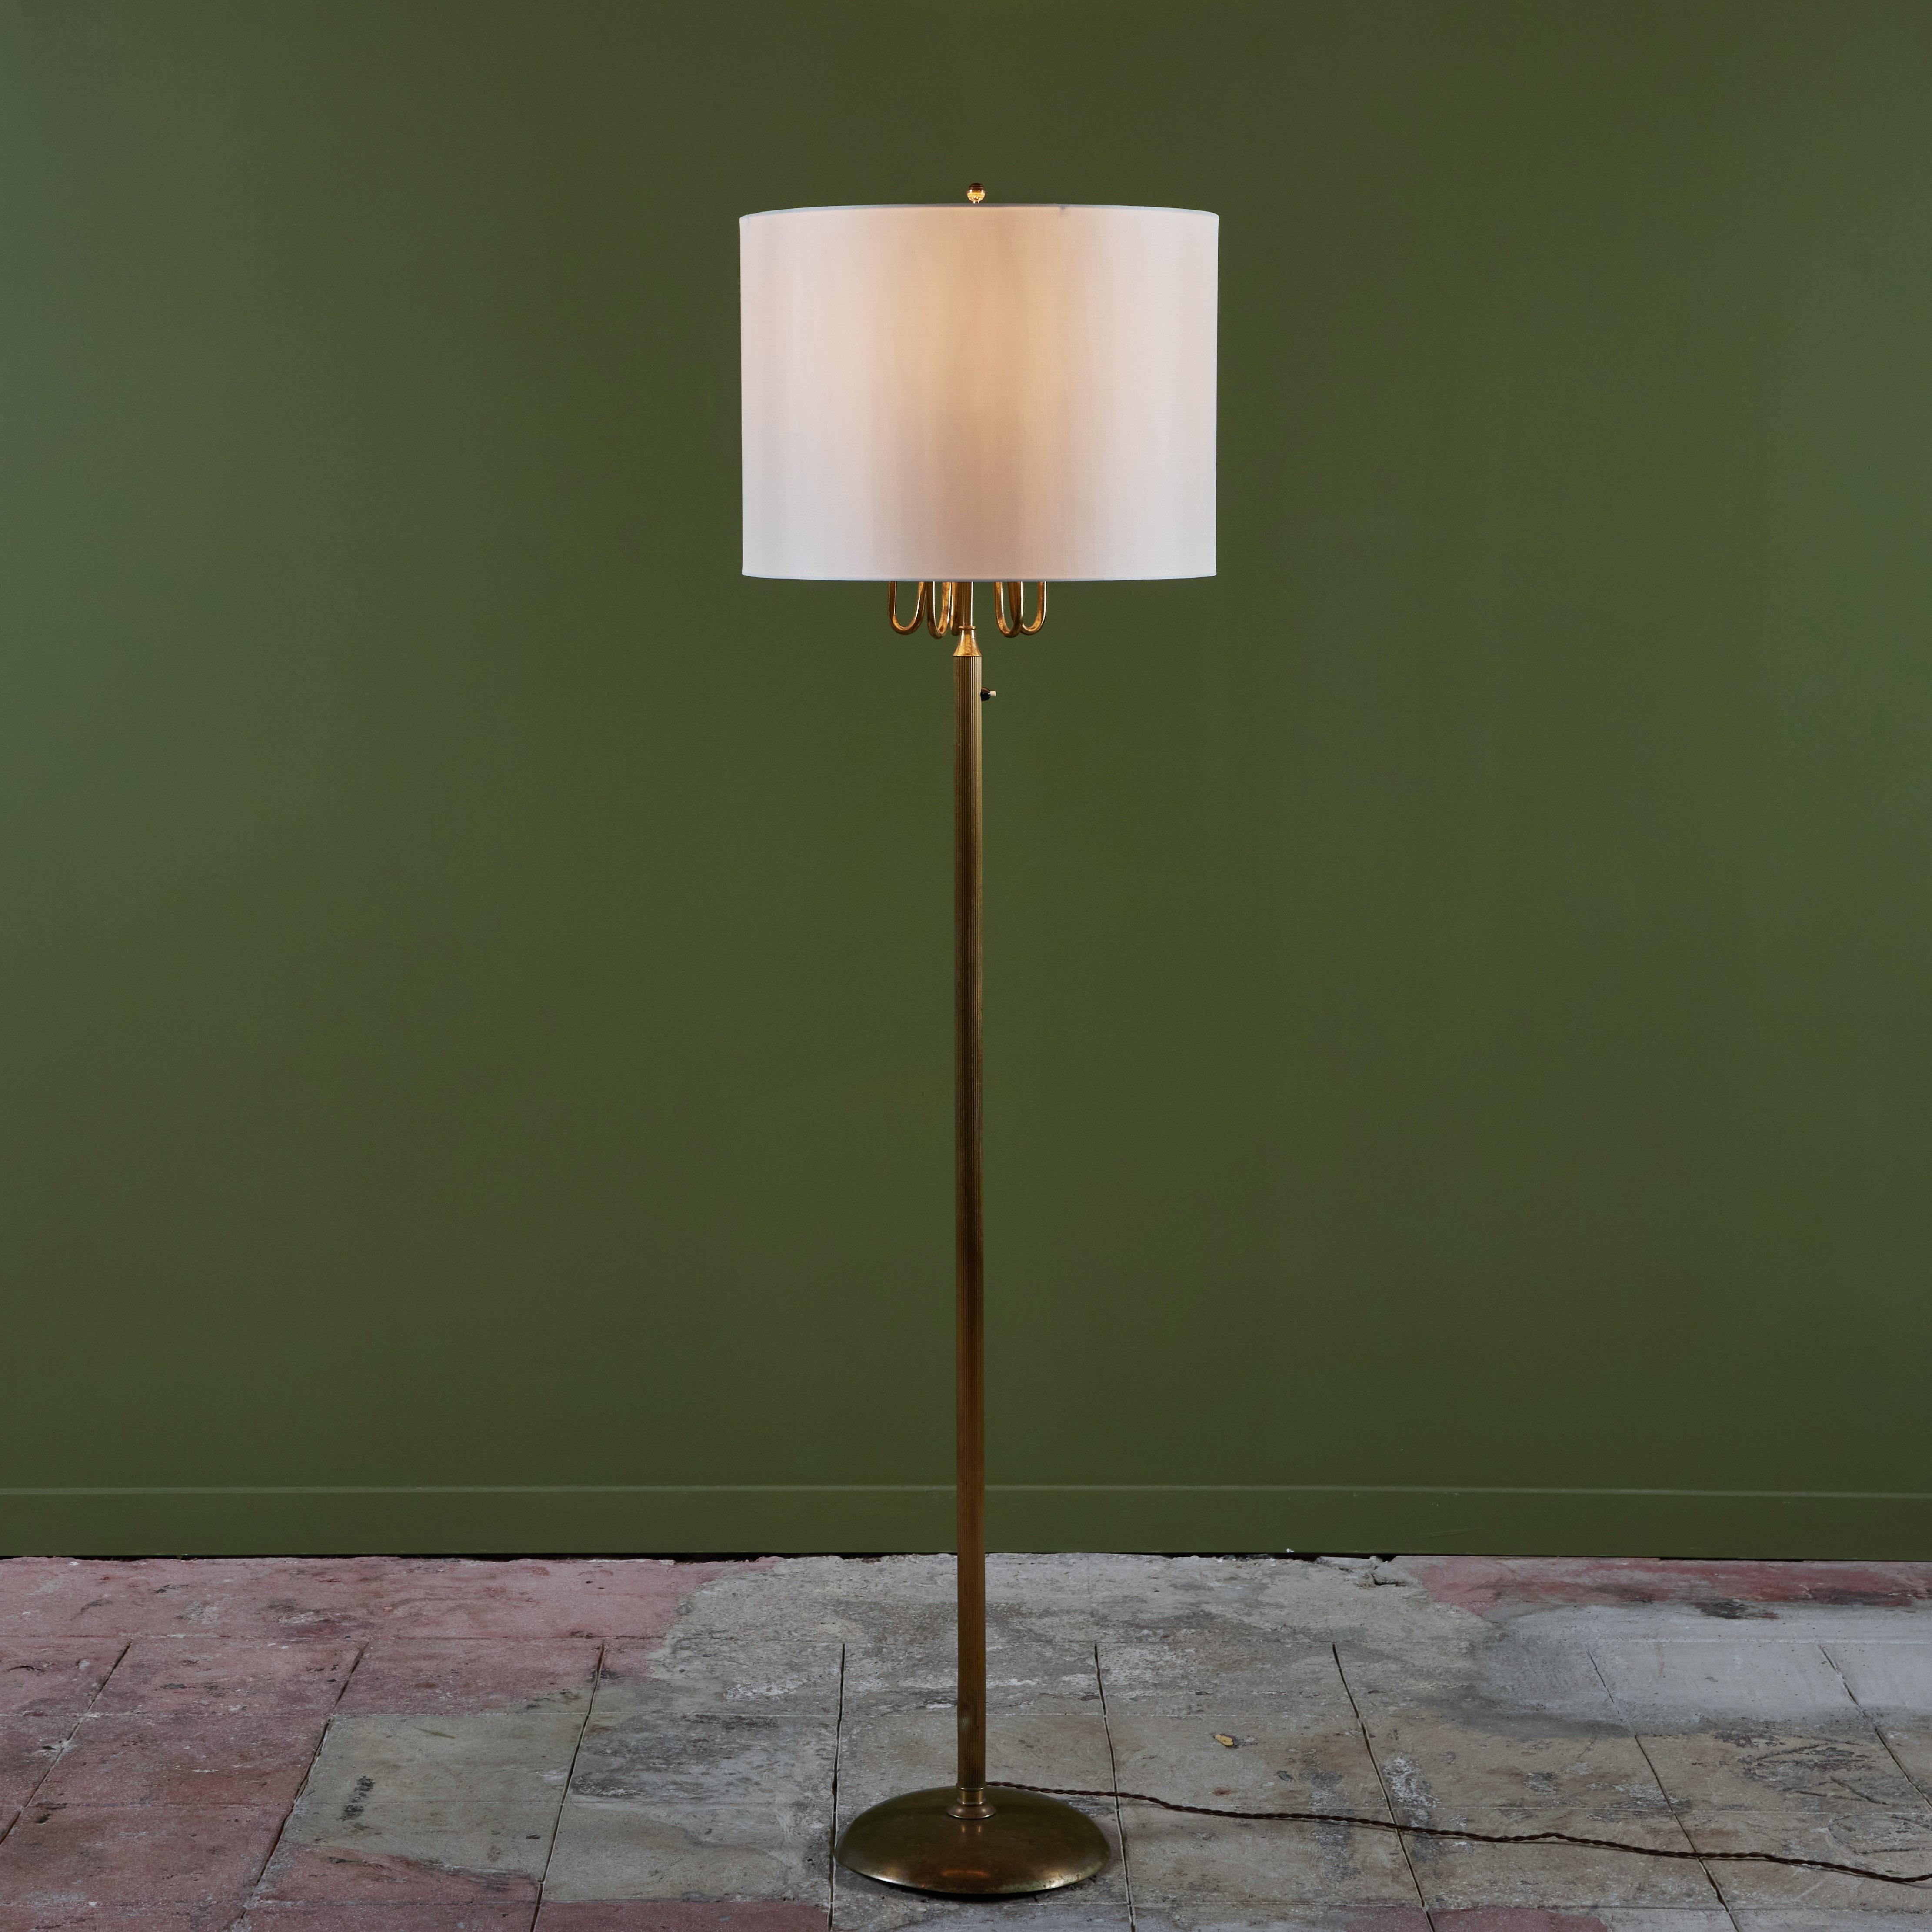 Brass floor lamp features a patinated bronze base and ribbed stem with new silk shade. The lamp has five curved arms under the lamp shade each with one bulb.

Dimensions
20